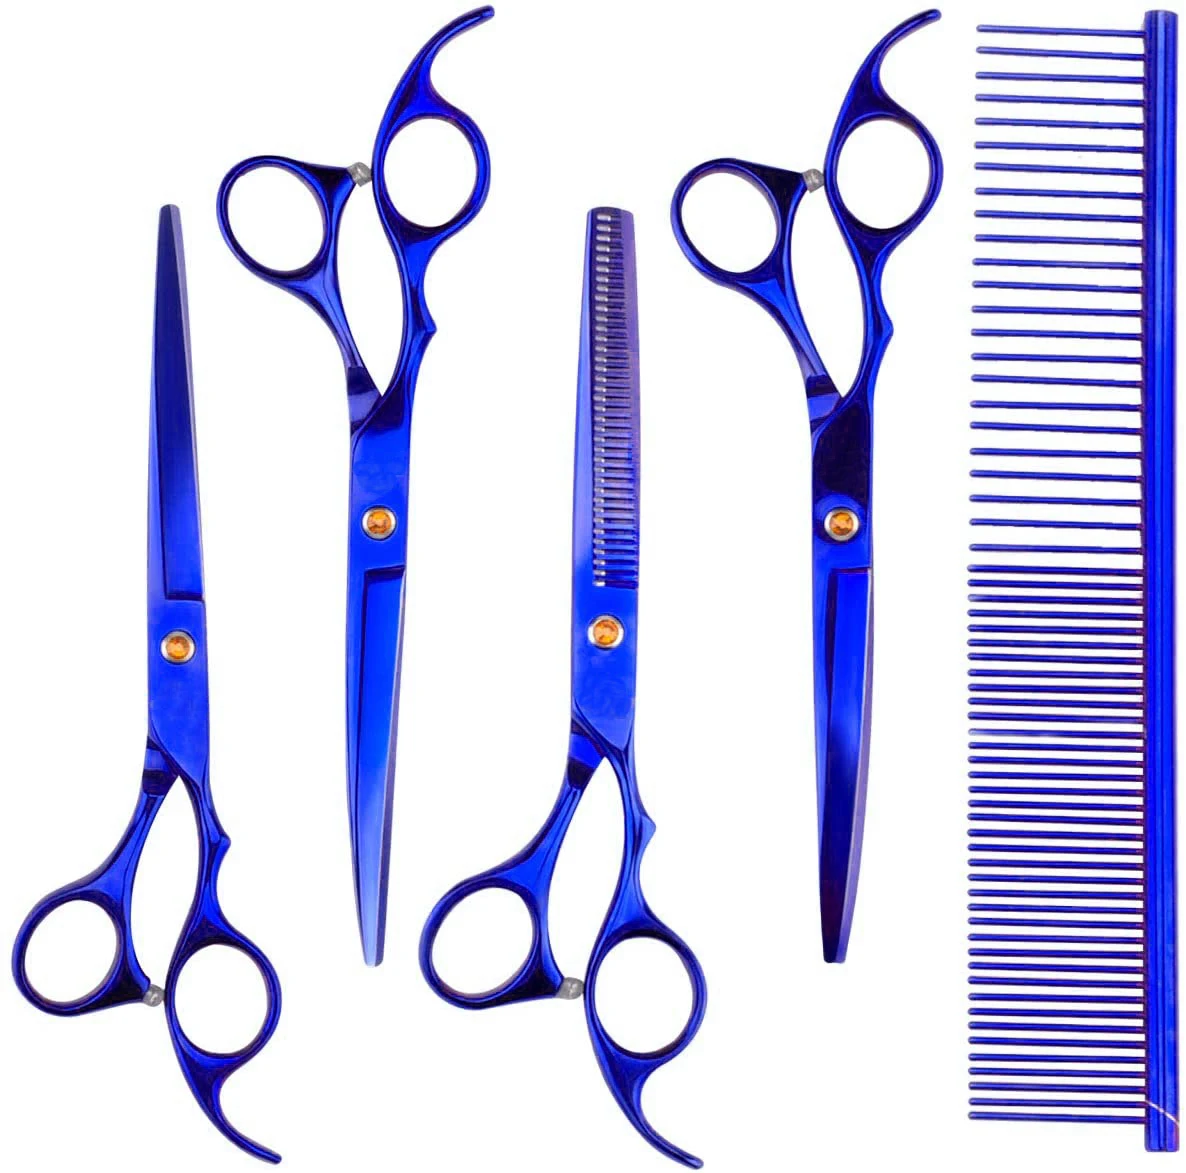 Low Price Pet Hair Cutting Scissors Set Dog Grooming Shears Cutting Scissors  For Sale - Buy Best Dog Hair Cutting Scissors,Pet Hair Cutting Scissors,Cheap  Pet Grooming Scissors Product on 